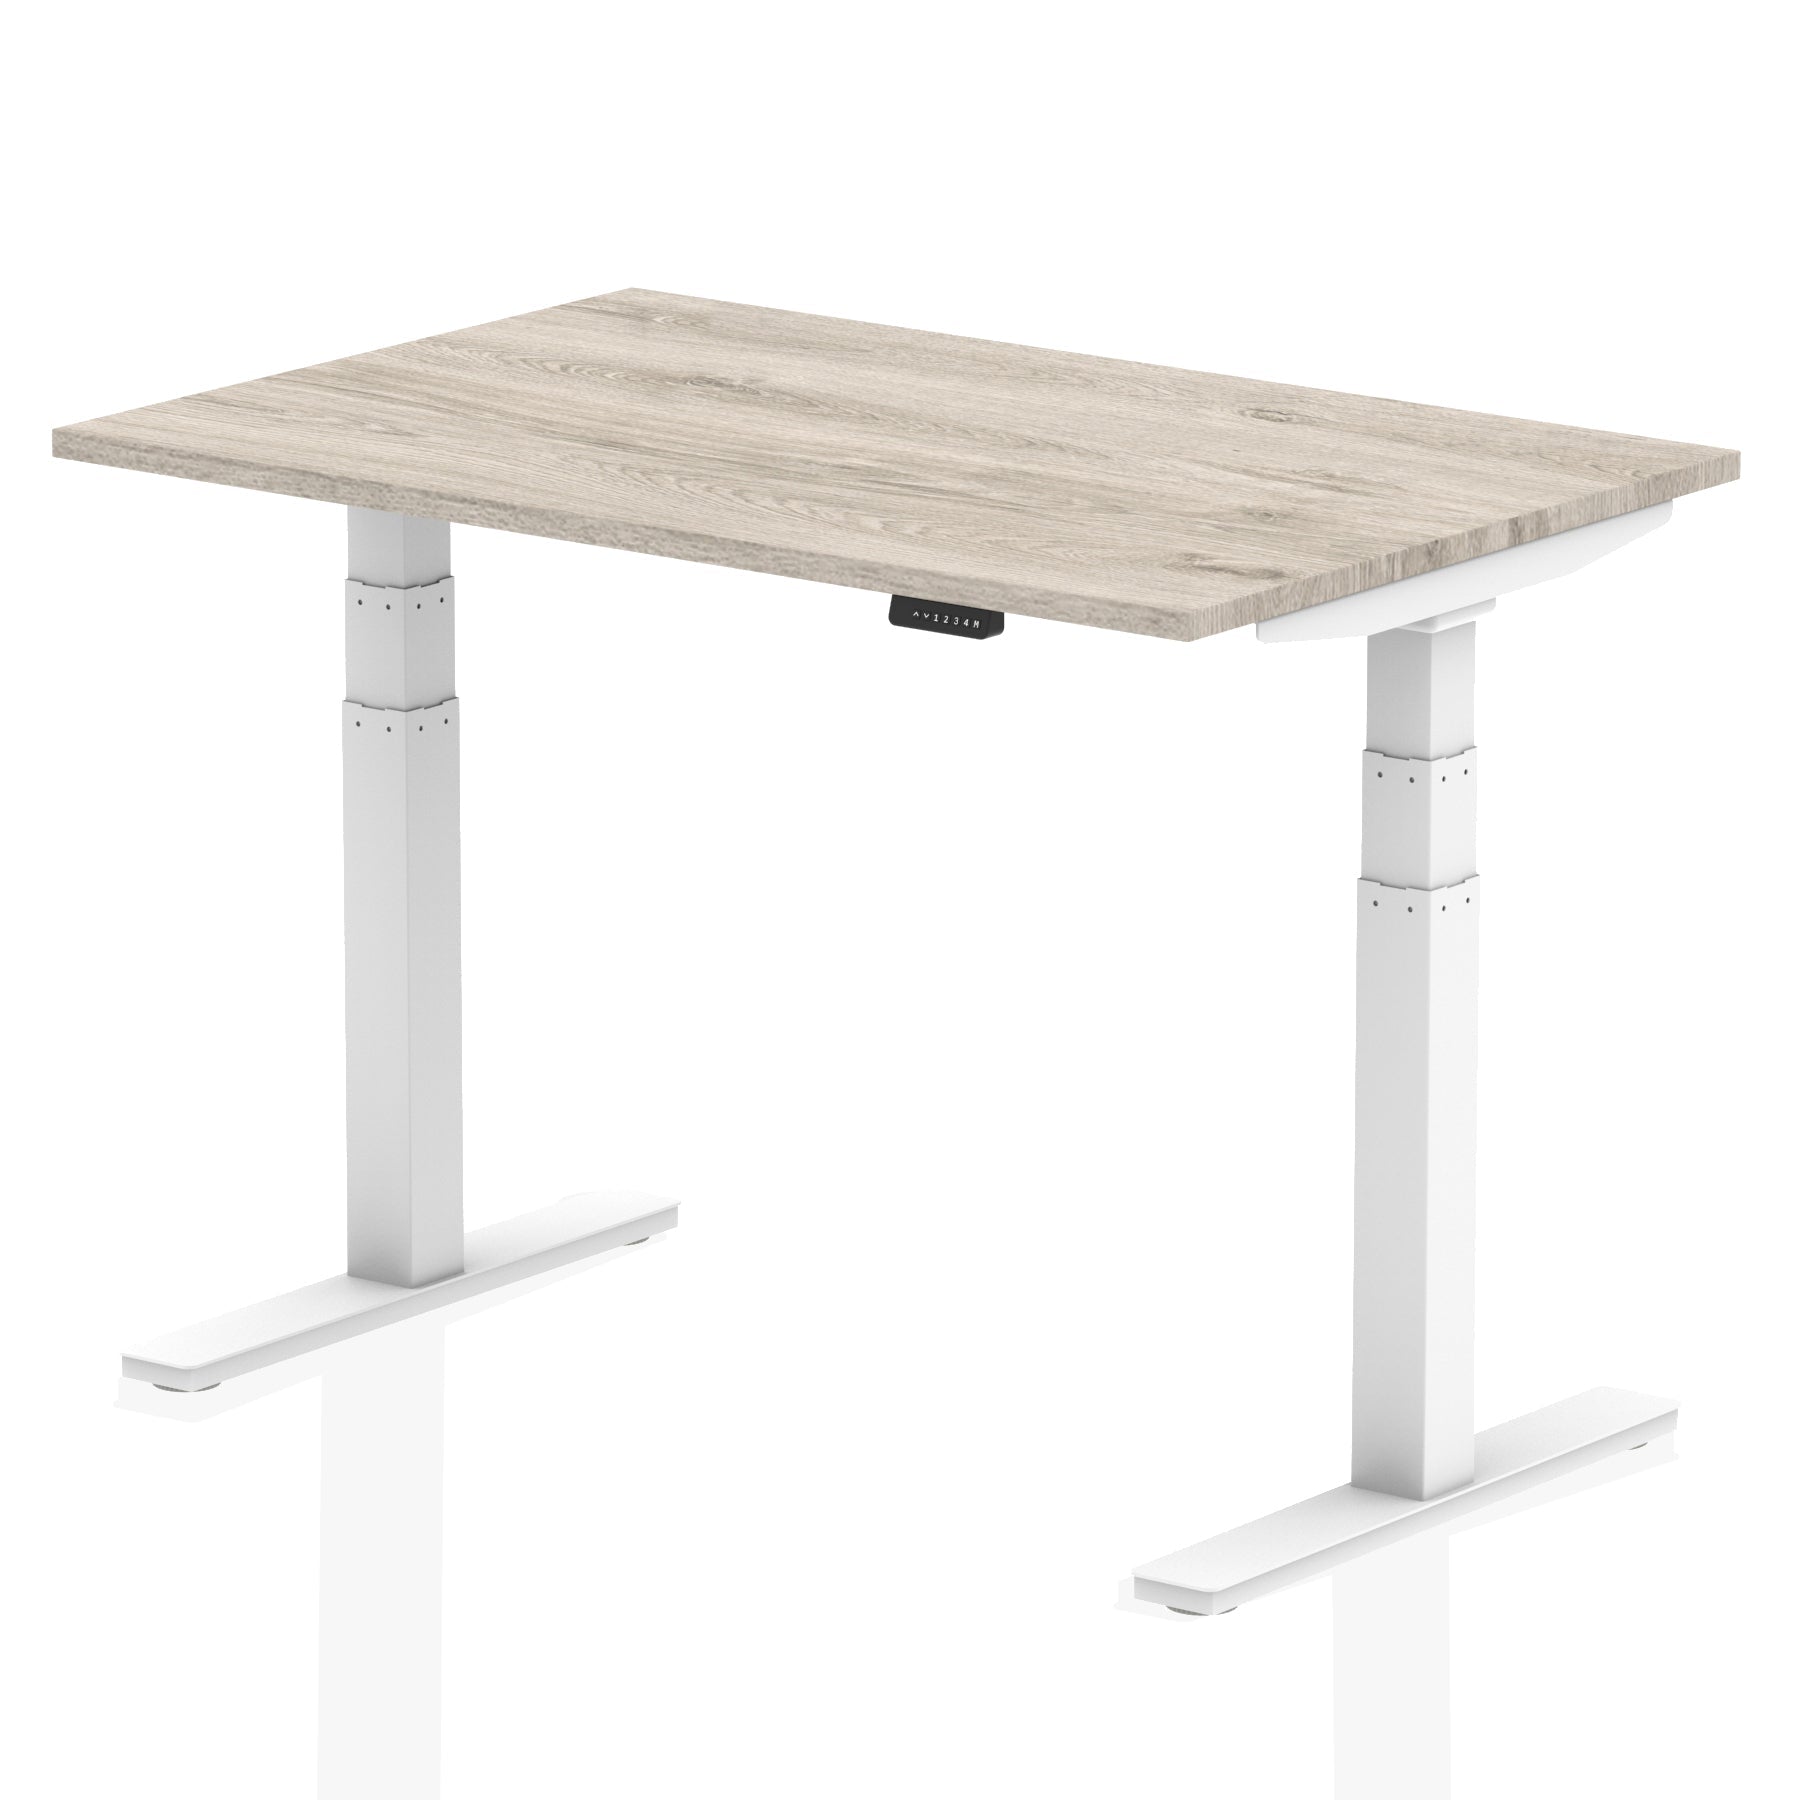 Air Height Adjustable Desk - 1200-1800mm Width, 800mm Depth, 660-1310mm Height, MFC Material, 5-Year Guarantee, Self-Assembly, Multiple Frame Colors